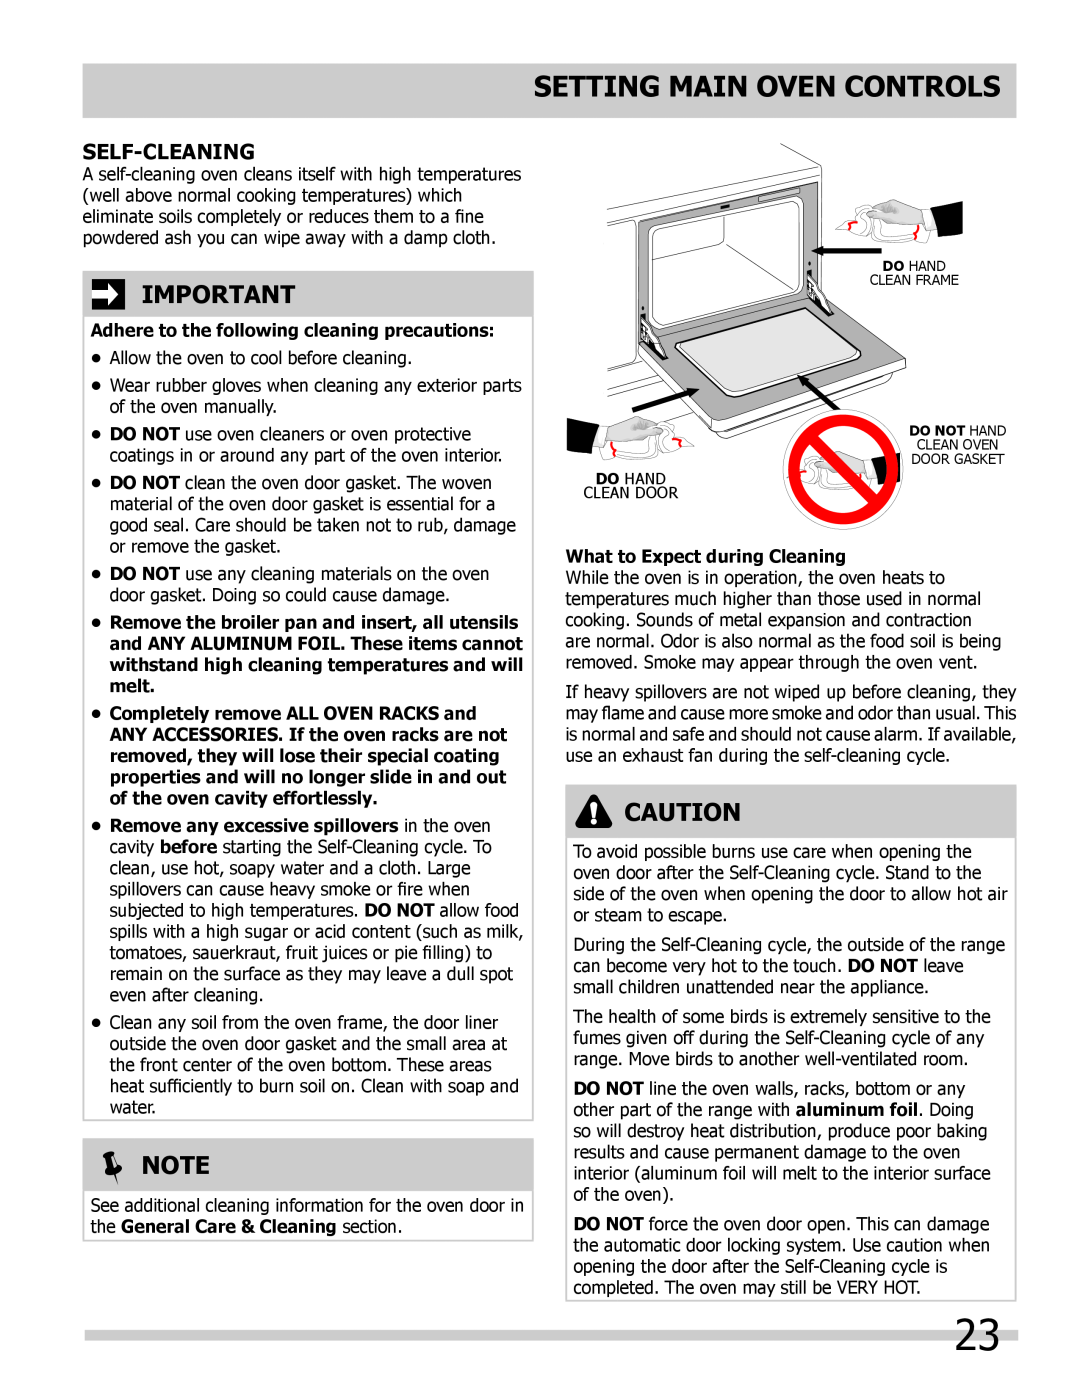 Frigidaire FPDF4085KF important safety instructions SETTING main OVEN CONTROLS, Self-cleaning, Note 